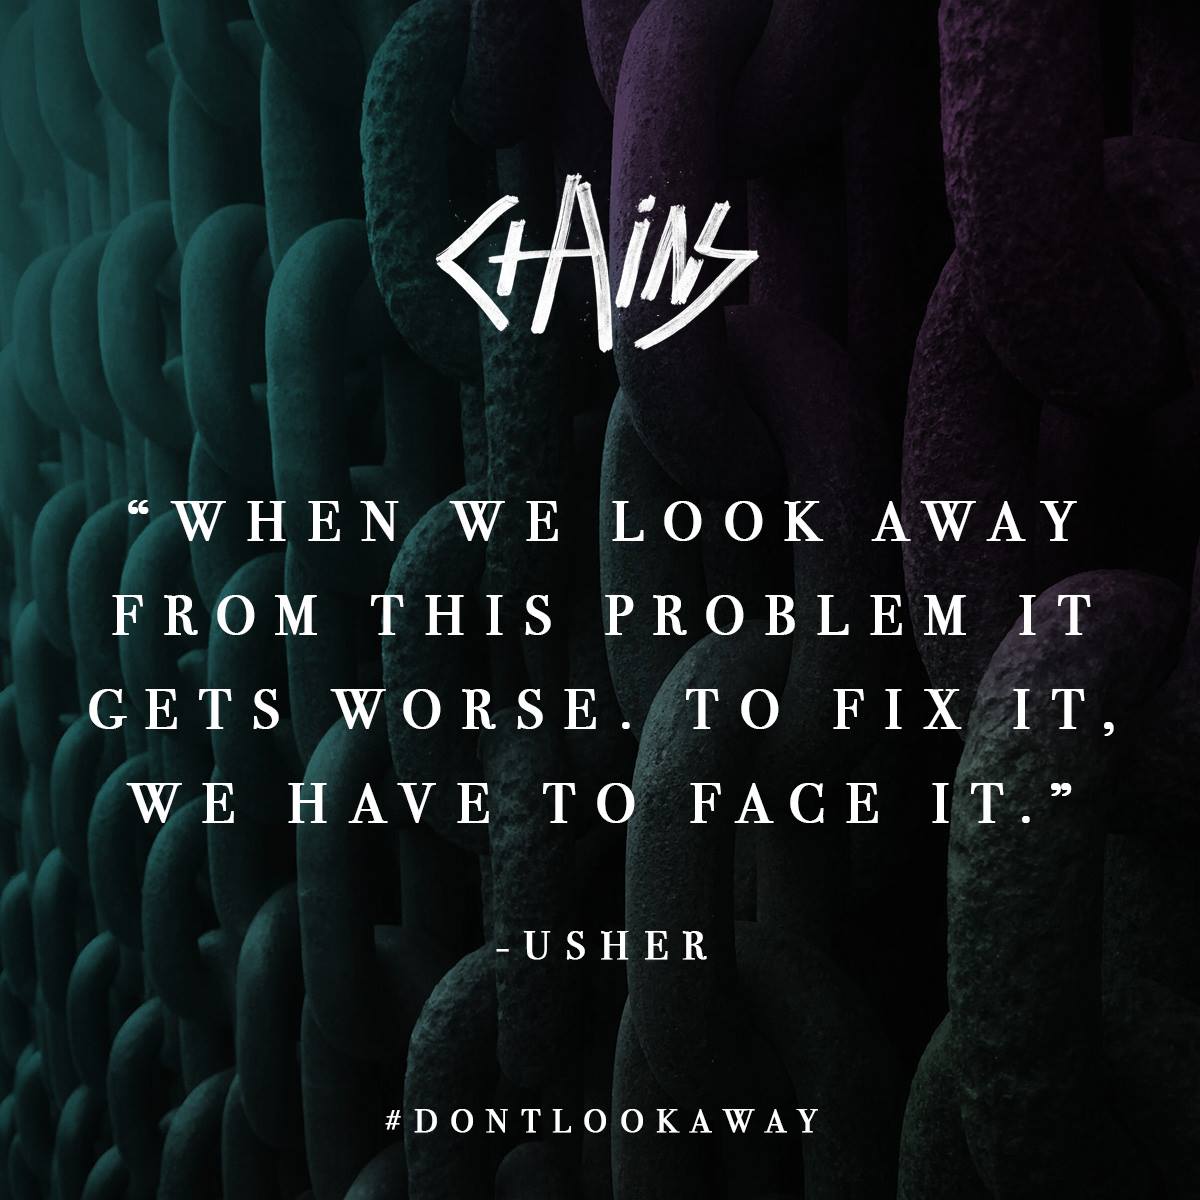 From my friend @Usher, experience #CHAINS at http://t.co/7ABuTxGVxO & #DontLookAway. http://t.co/uAlfrNKsO5